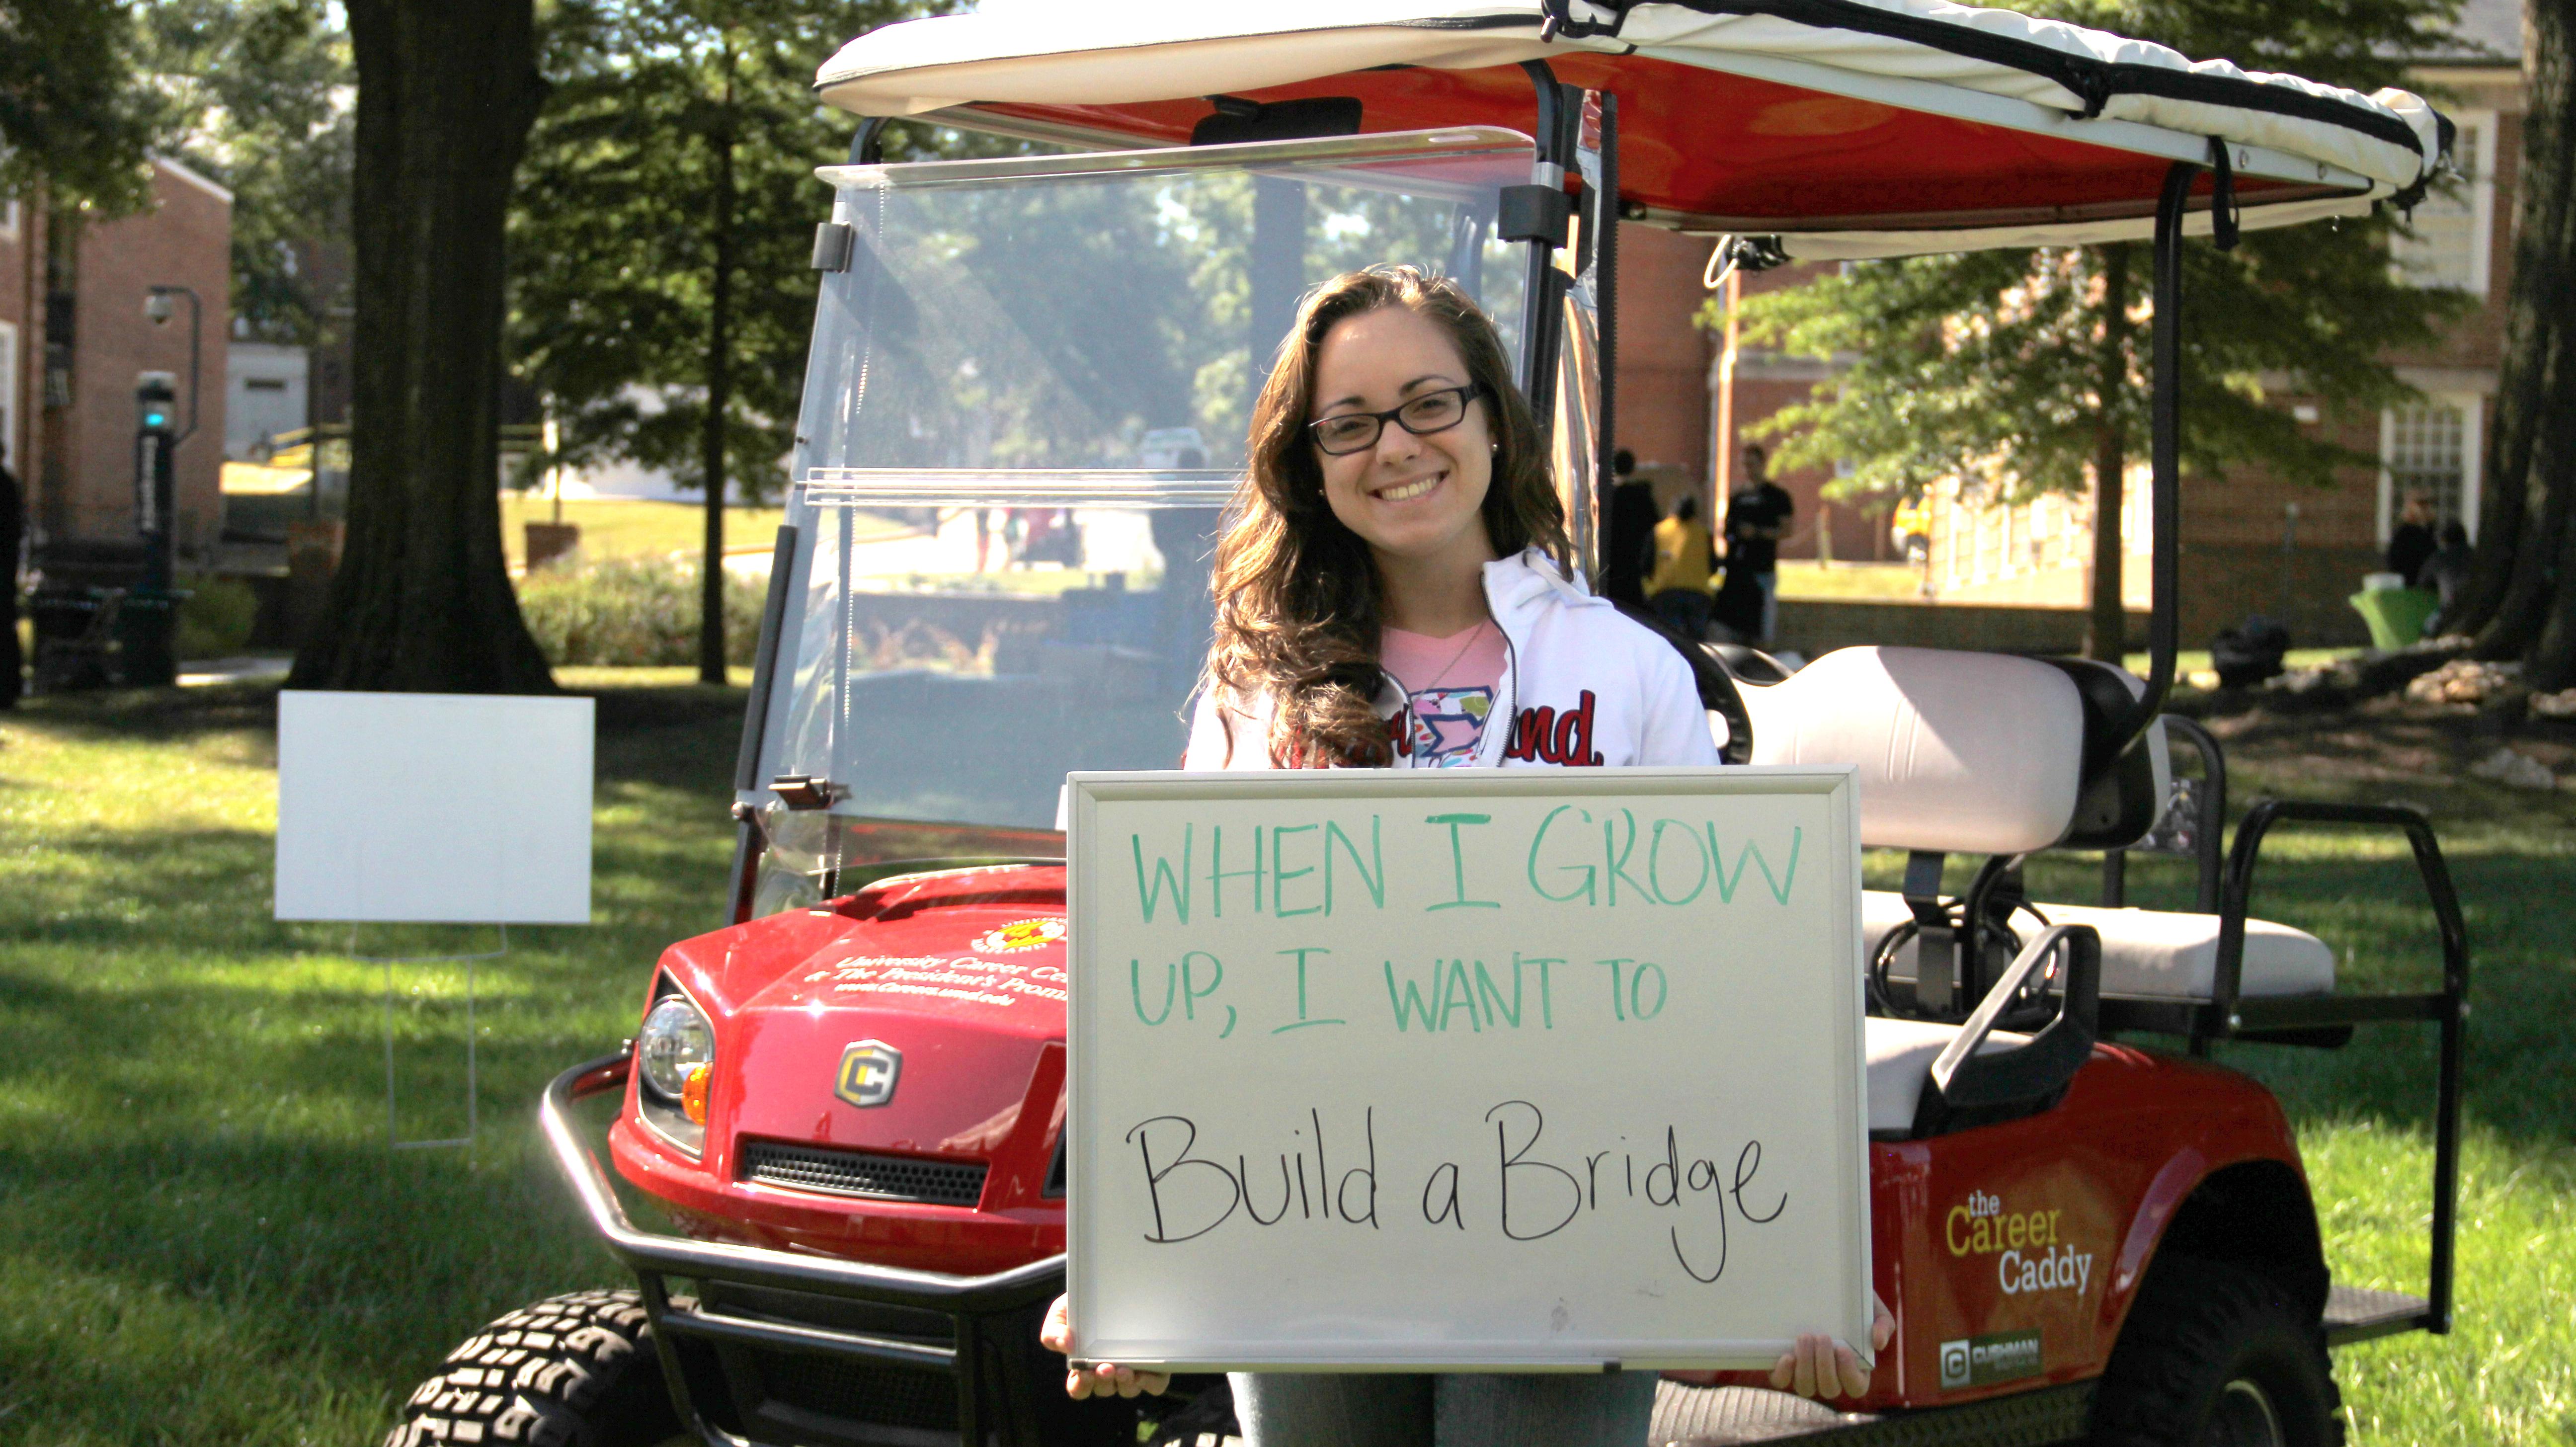 Photo: Young woman holding sign: "When I grow up, I want to Build a Bridge"